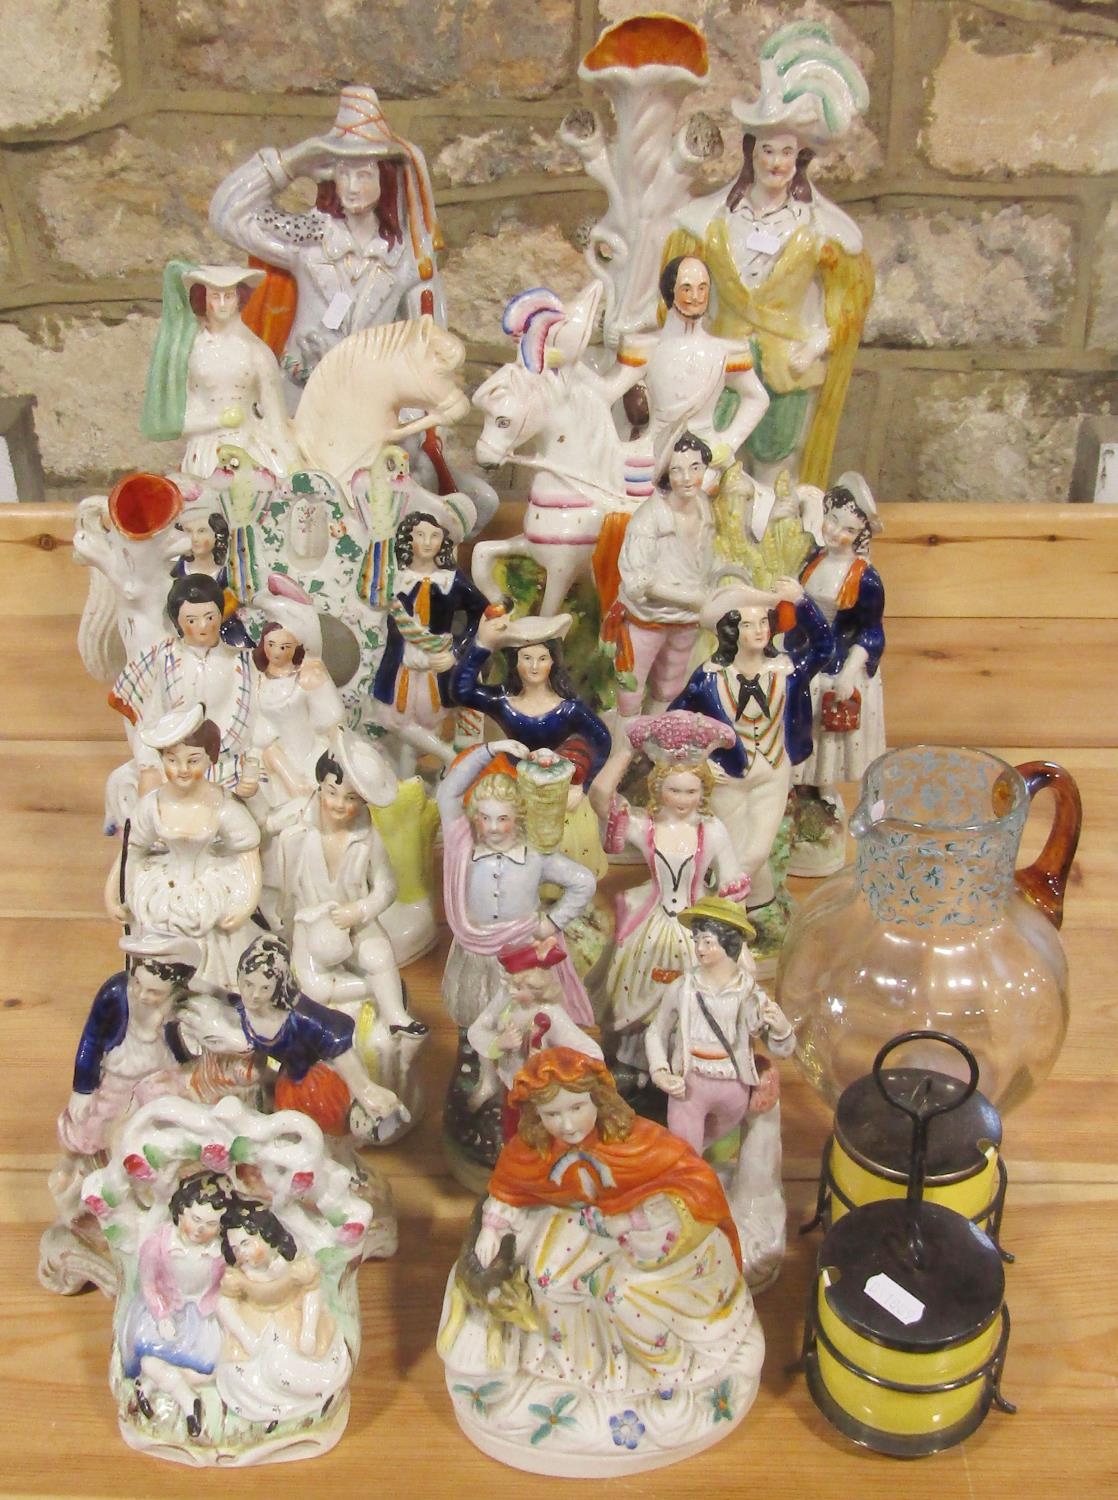 A quantity of 19th century Staffordshire figure groups including equestrian subjects The Duke of - Image 2 of 2